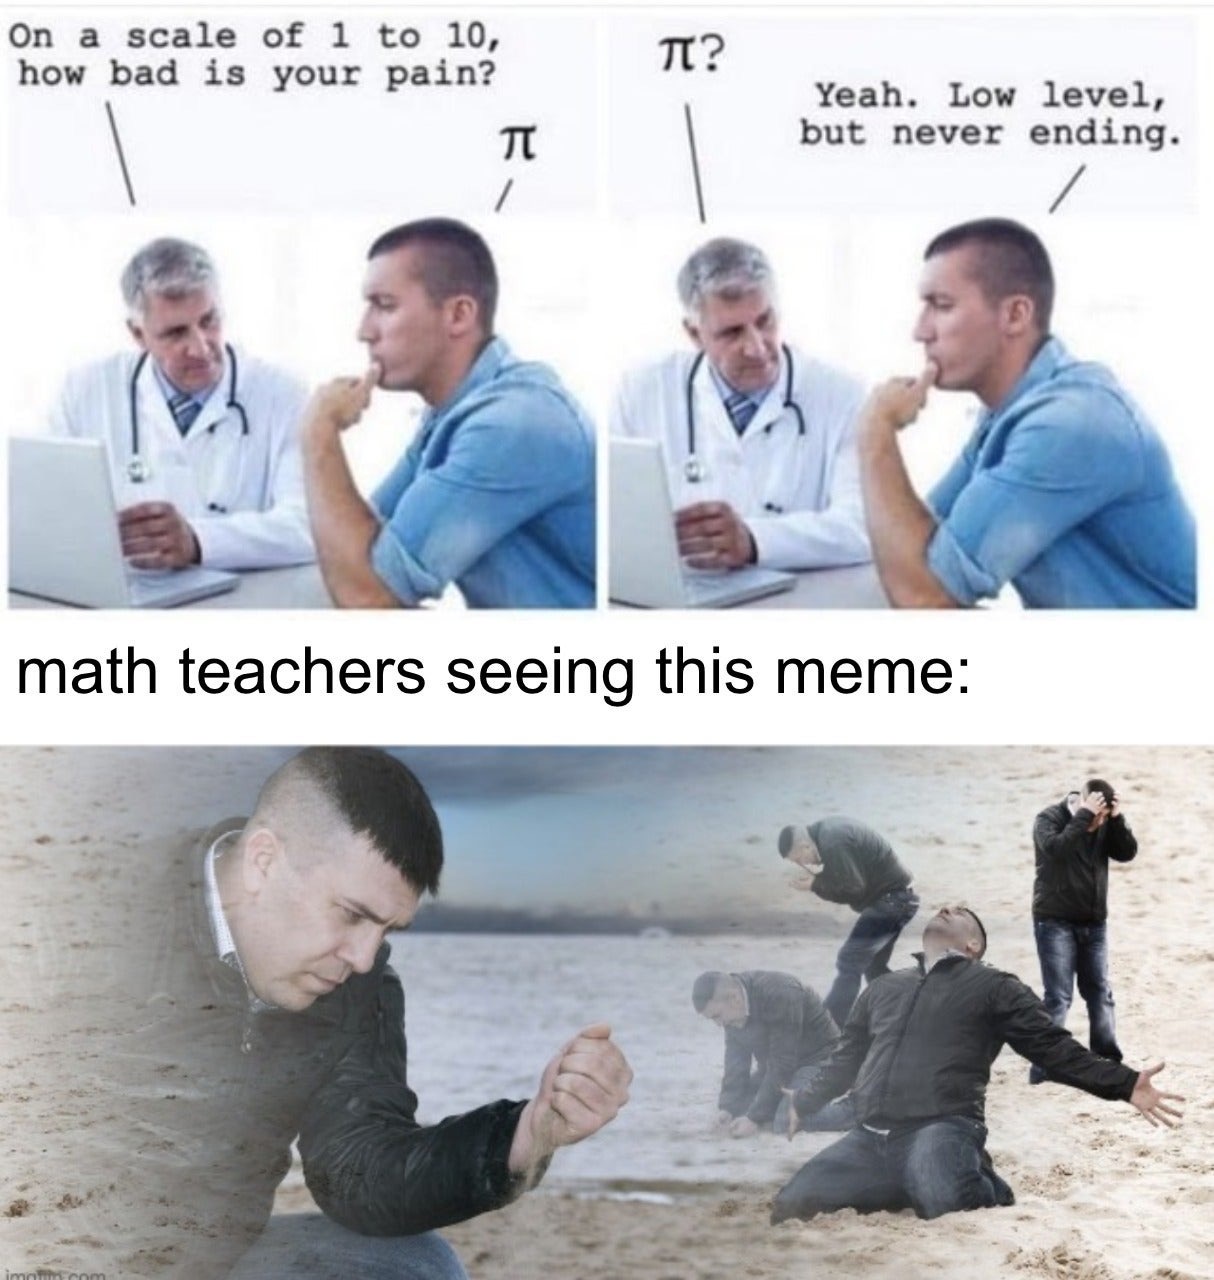 offensive memes - On a scale of 1 to 10, how bad is your pain? T? Yeah. Low level, but never ending. math teachers seeing this meme imico